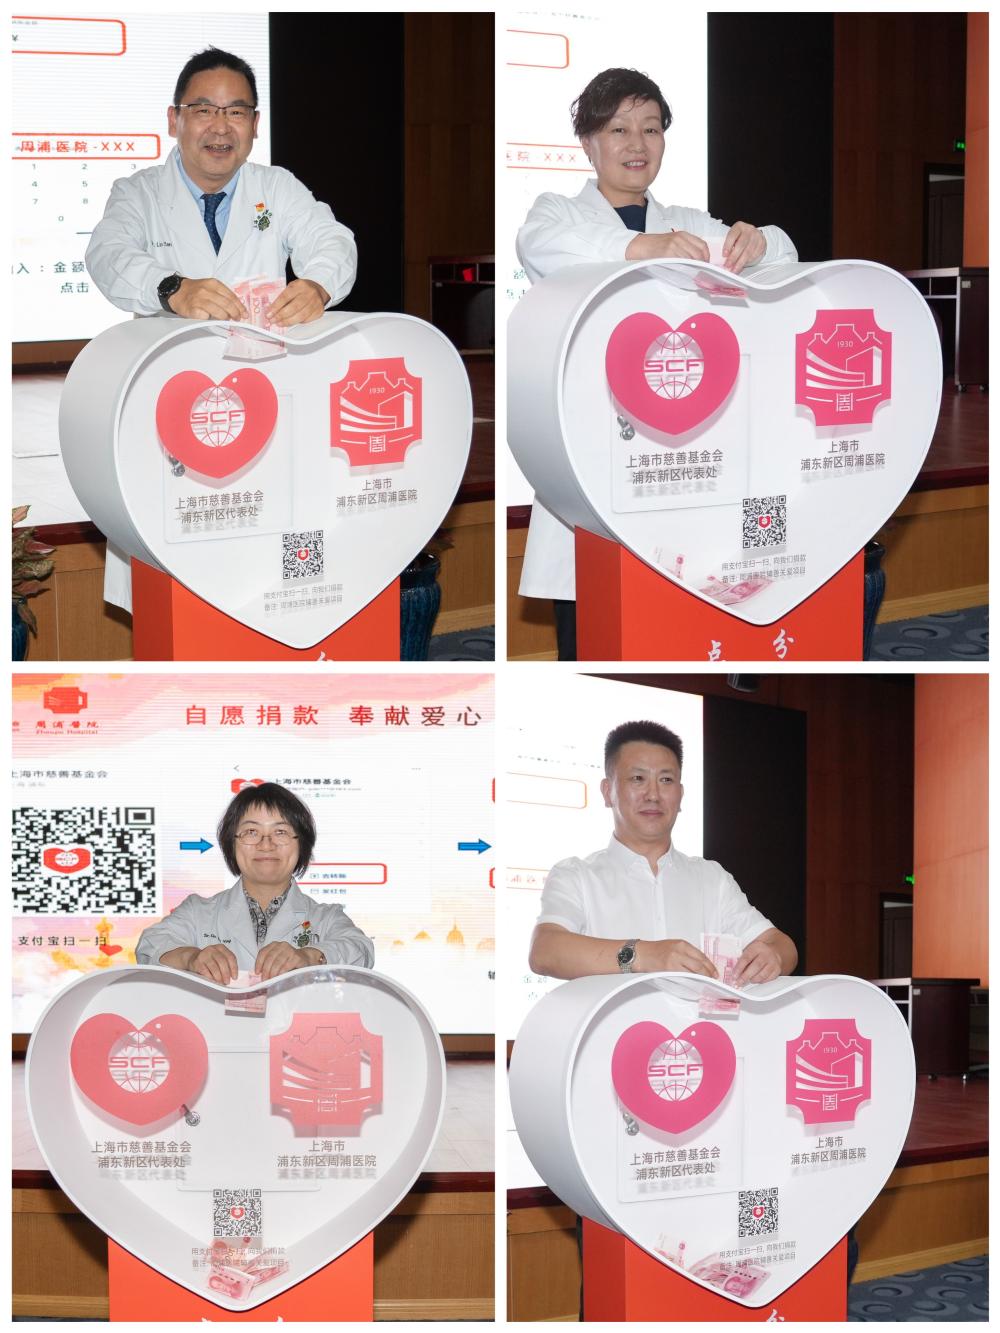 The Shanghai Charity Foundation launched this special project to help more patients regain hope in hospitals. Hospital | Zhoupu Hospital | Shanghai Charity Foundation